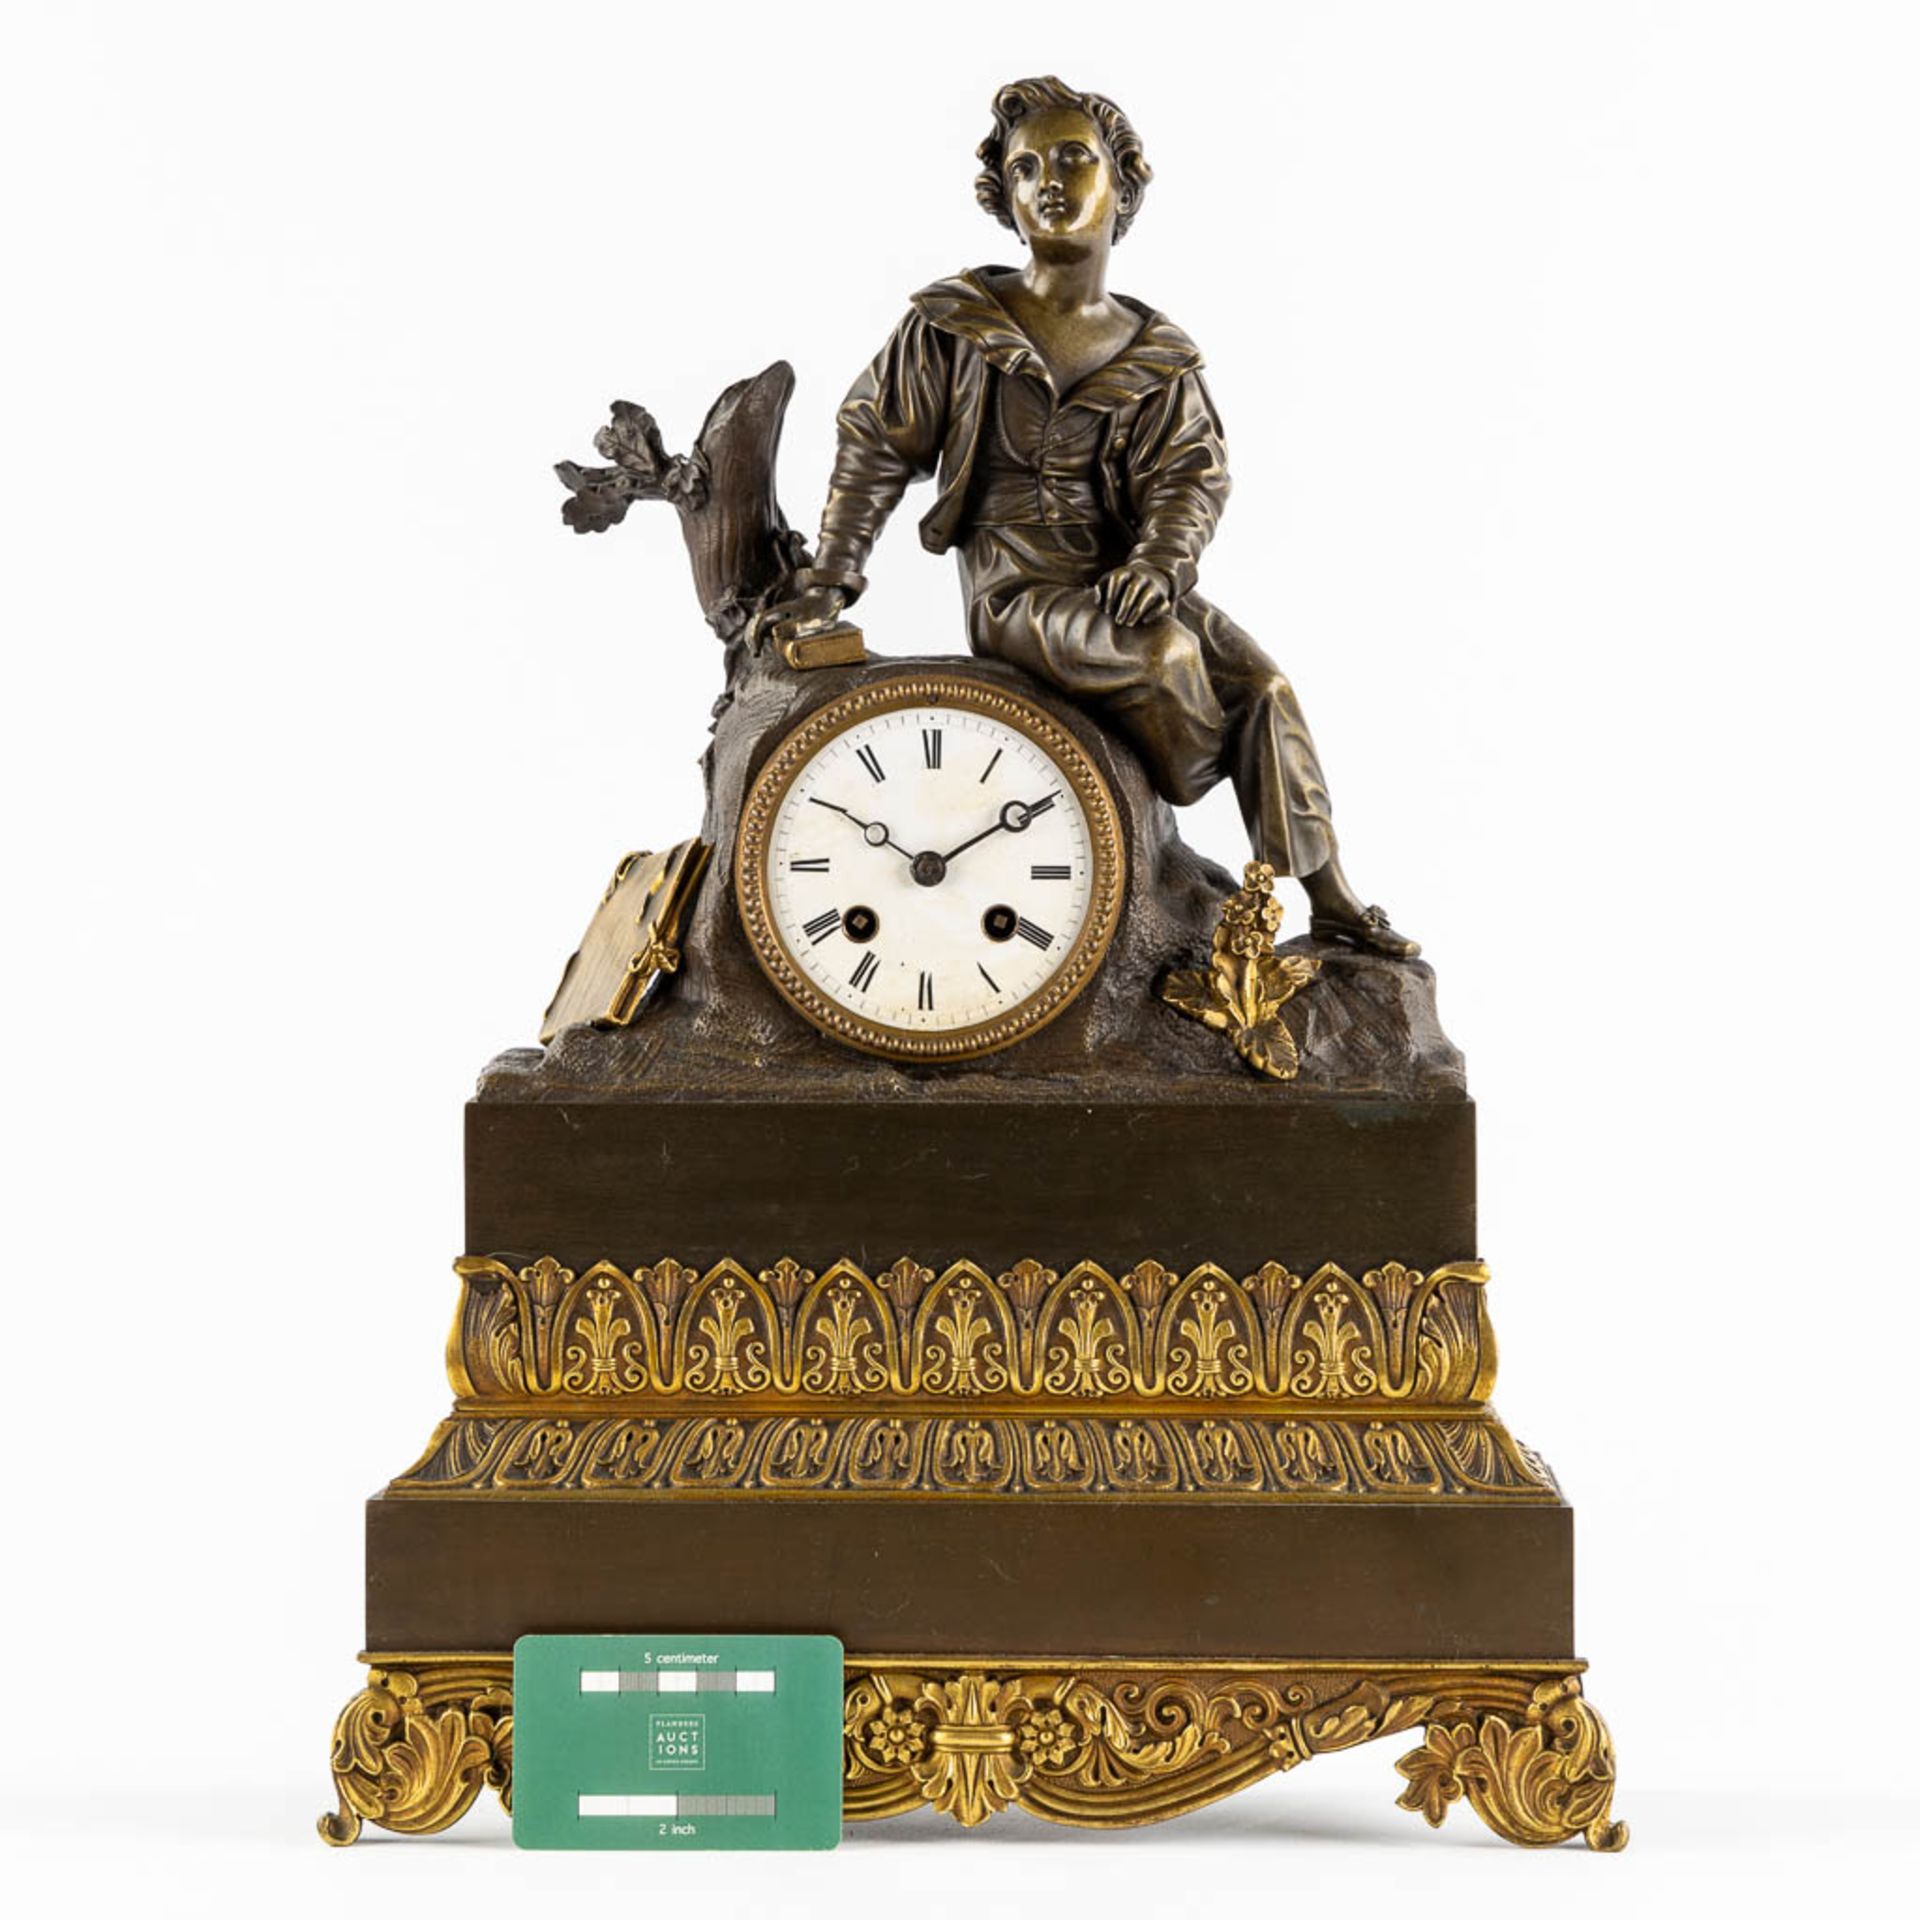 A mantle clock, gilt and patinated bronze, Empire style. 19th C. (L:13 x W:34 x H:46 cm) - Image 2 of 9